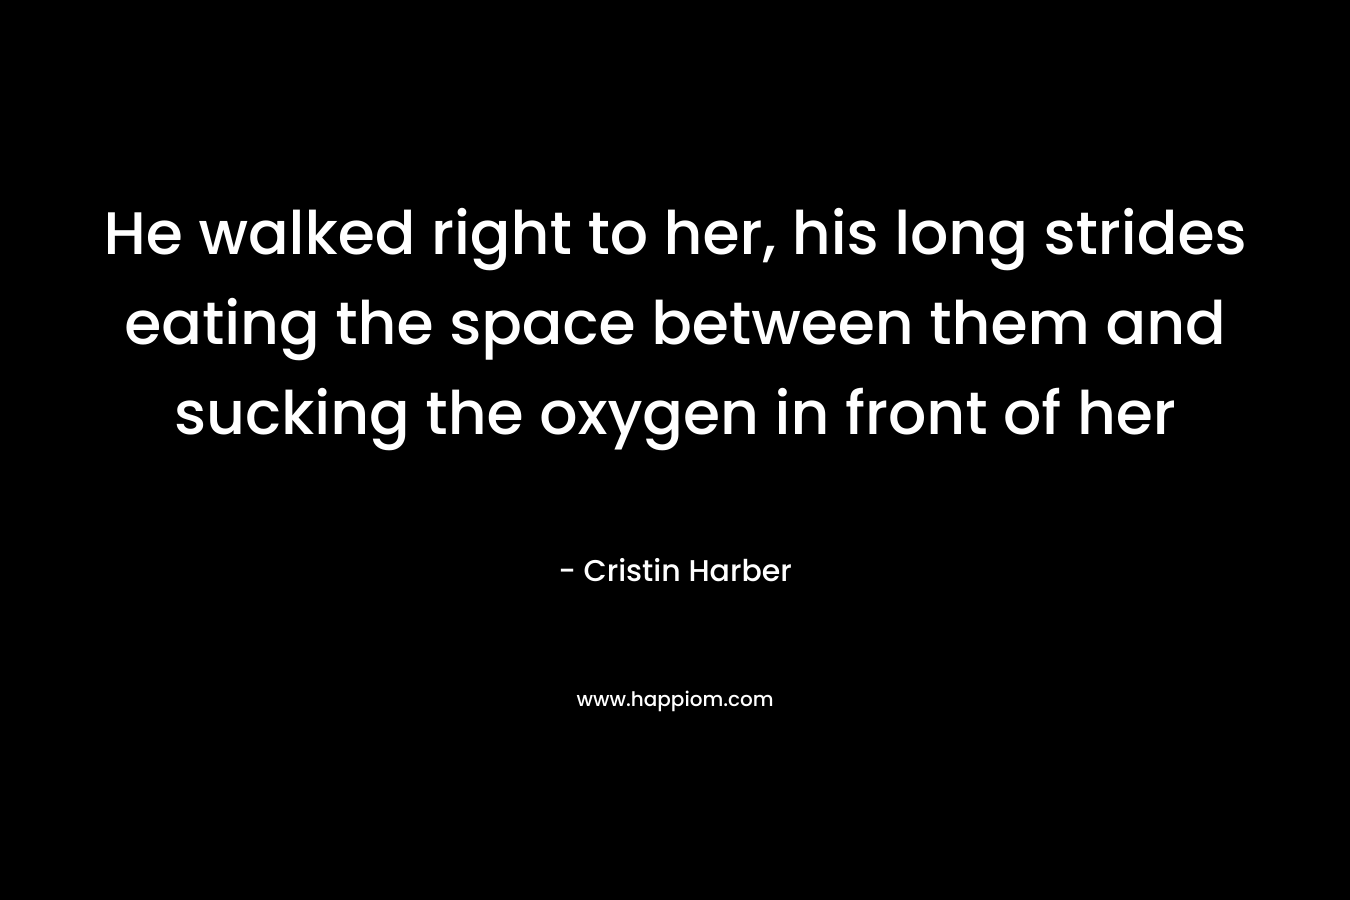 He walked right to her, his long strides eating the space between them and sucking the oxygen in front of her